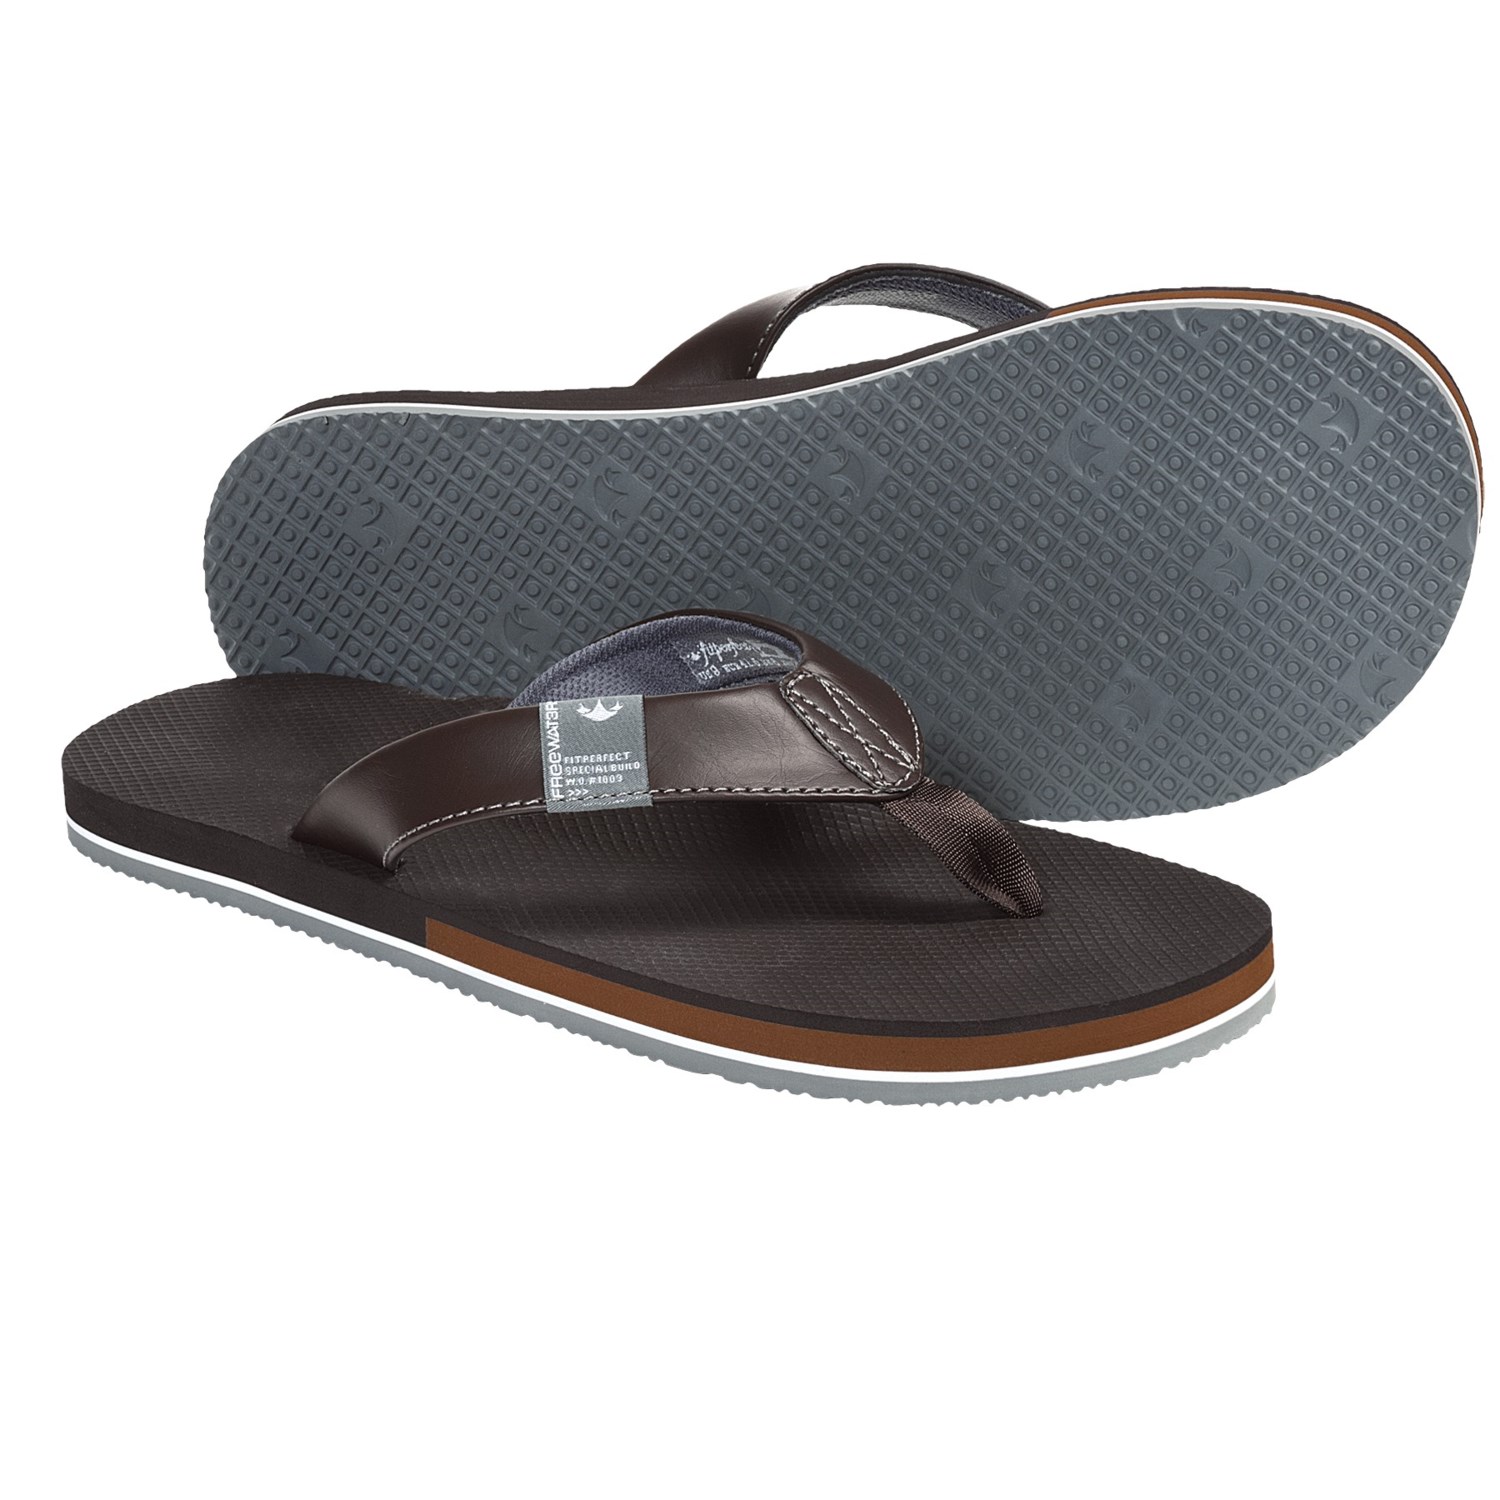 Freewaters The Dude Sandals - Flip-Flops (For Men) - Save 60%